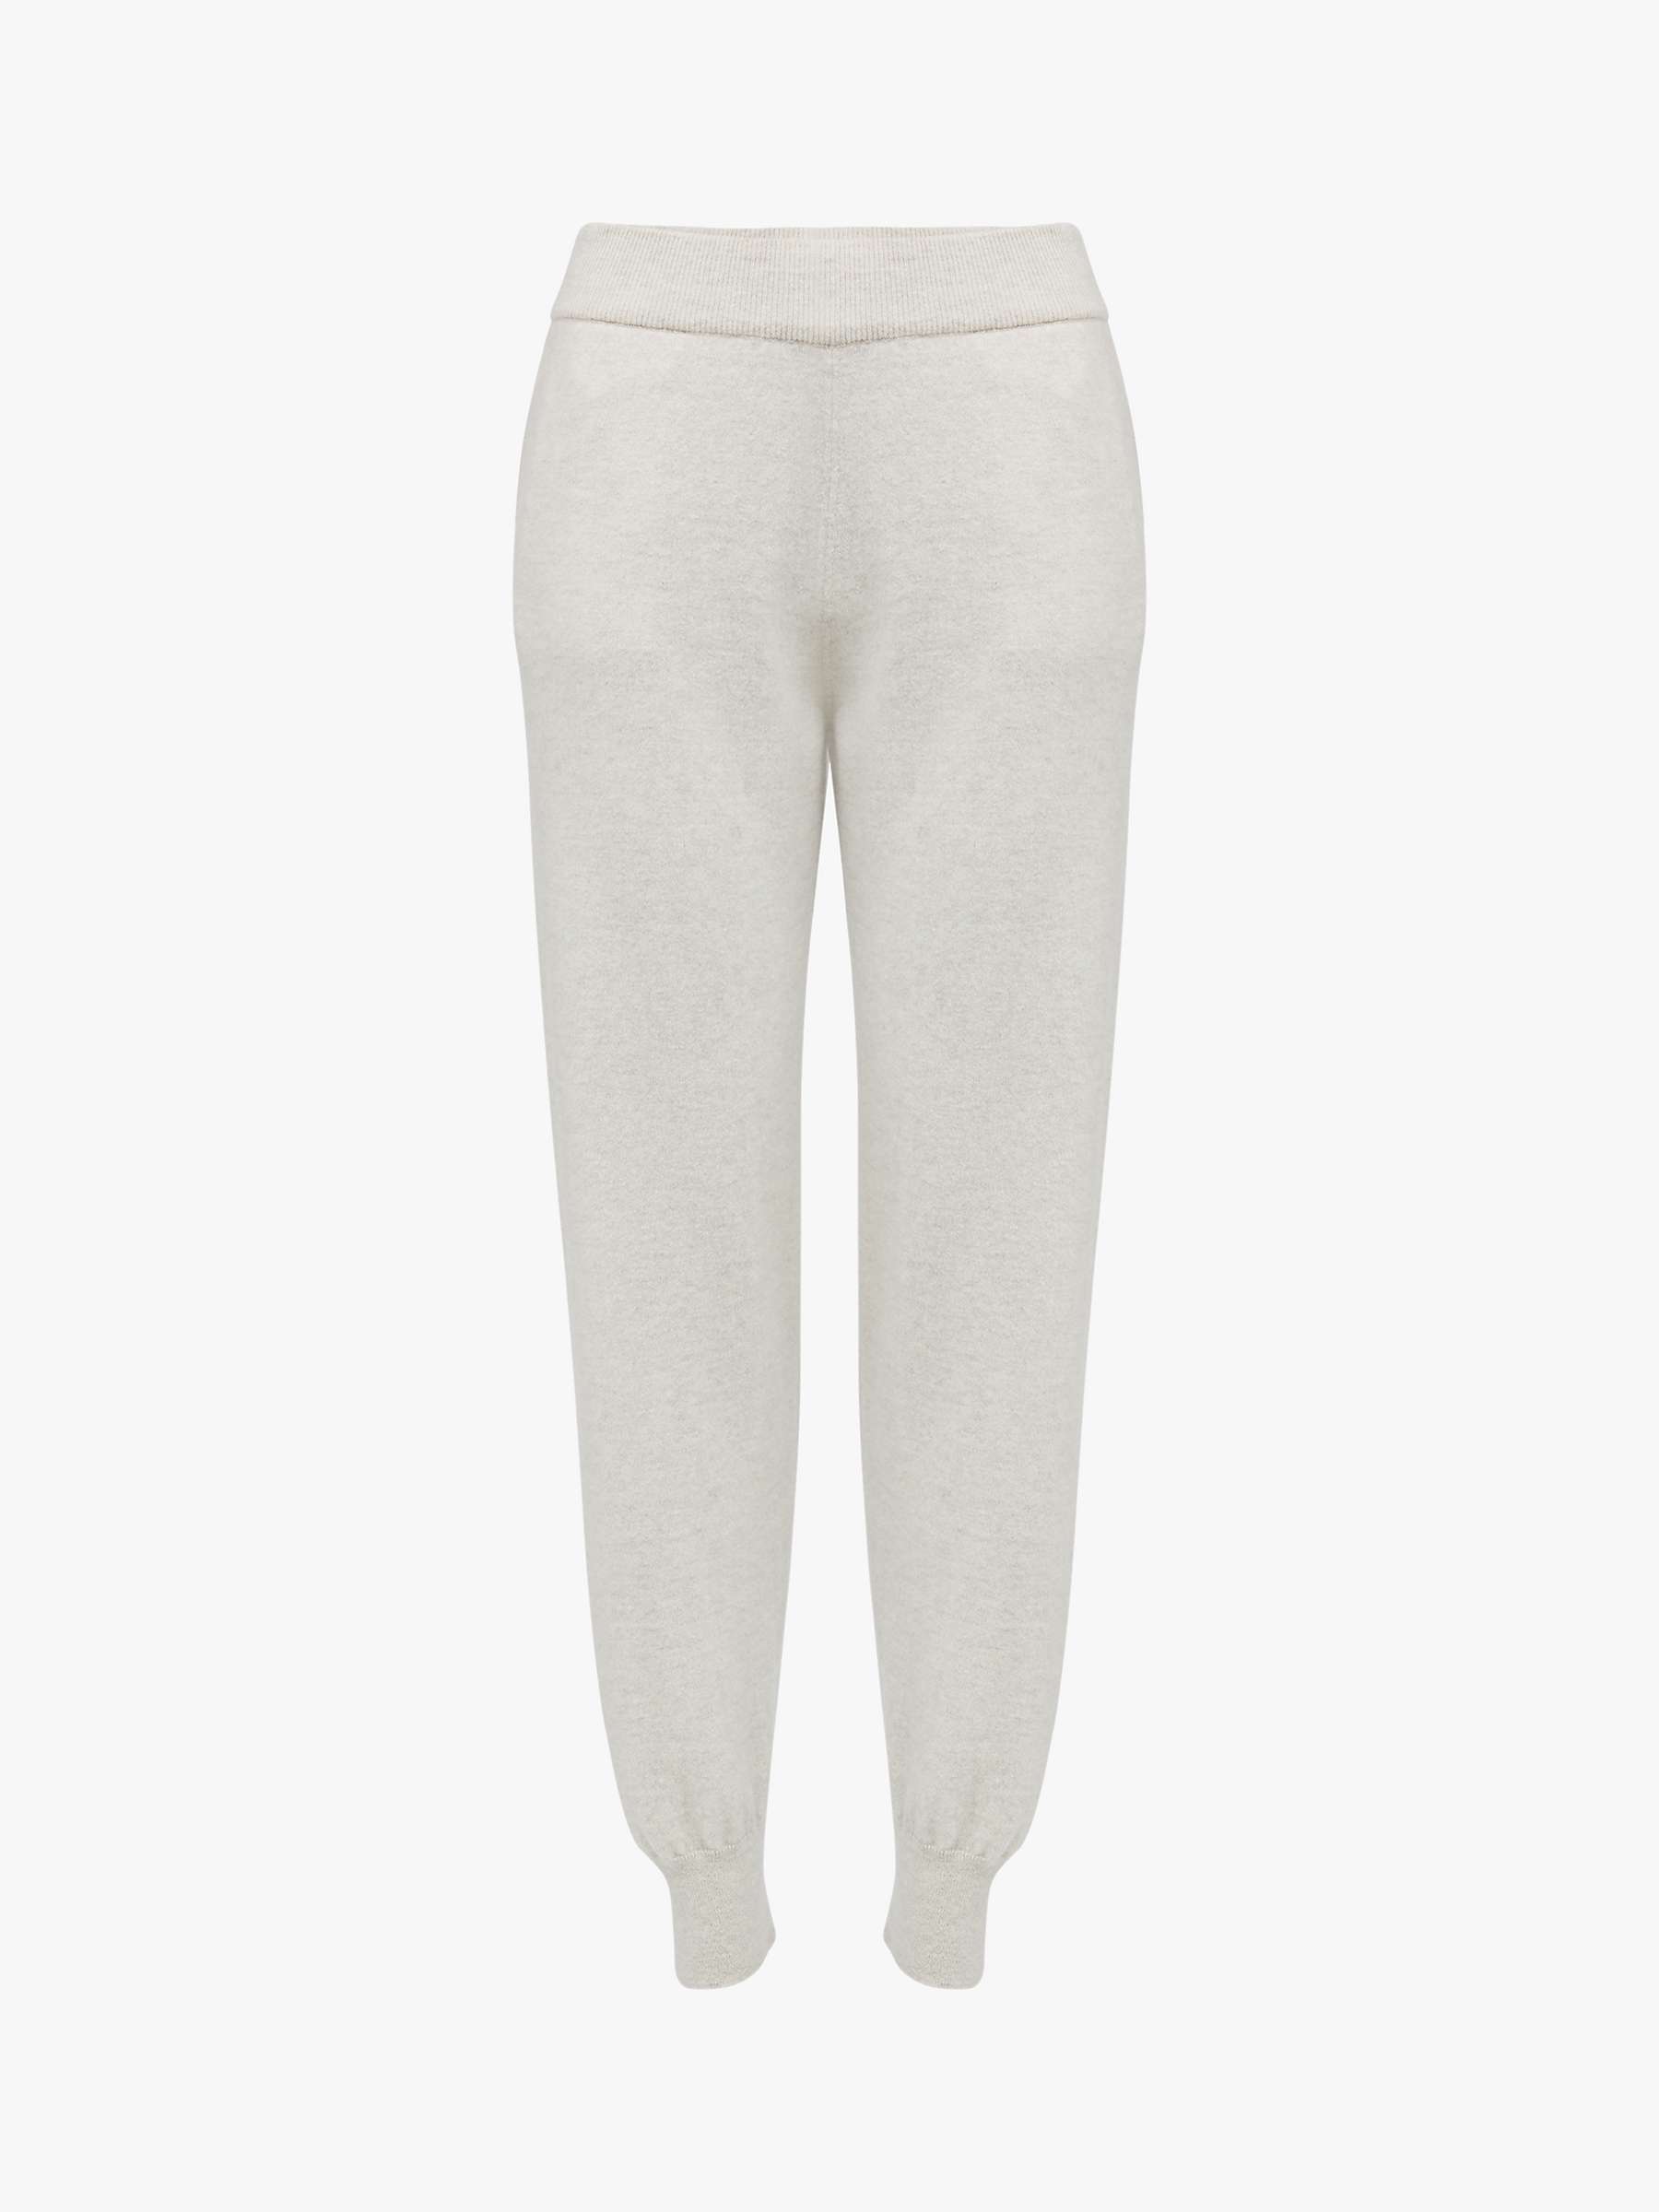 Buy Celtic & Co. Geelong Wool Lounge Joggers, Pearl Grey Online at johnlewis.com